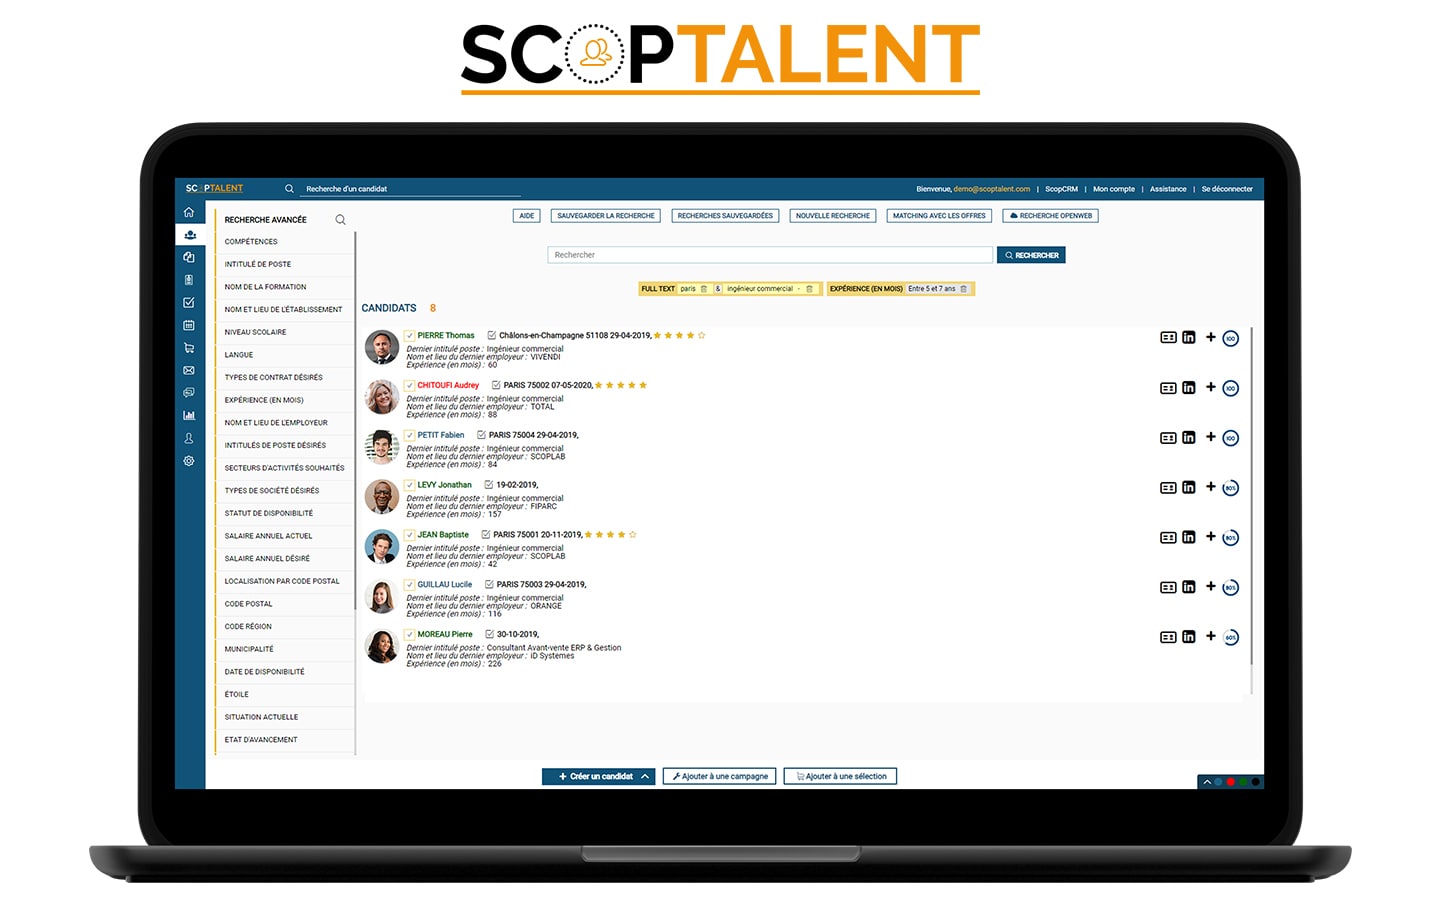 ScopTalent - Candidate library